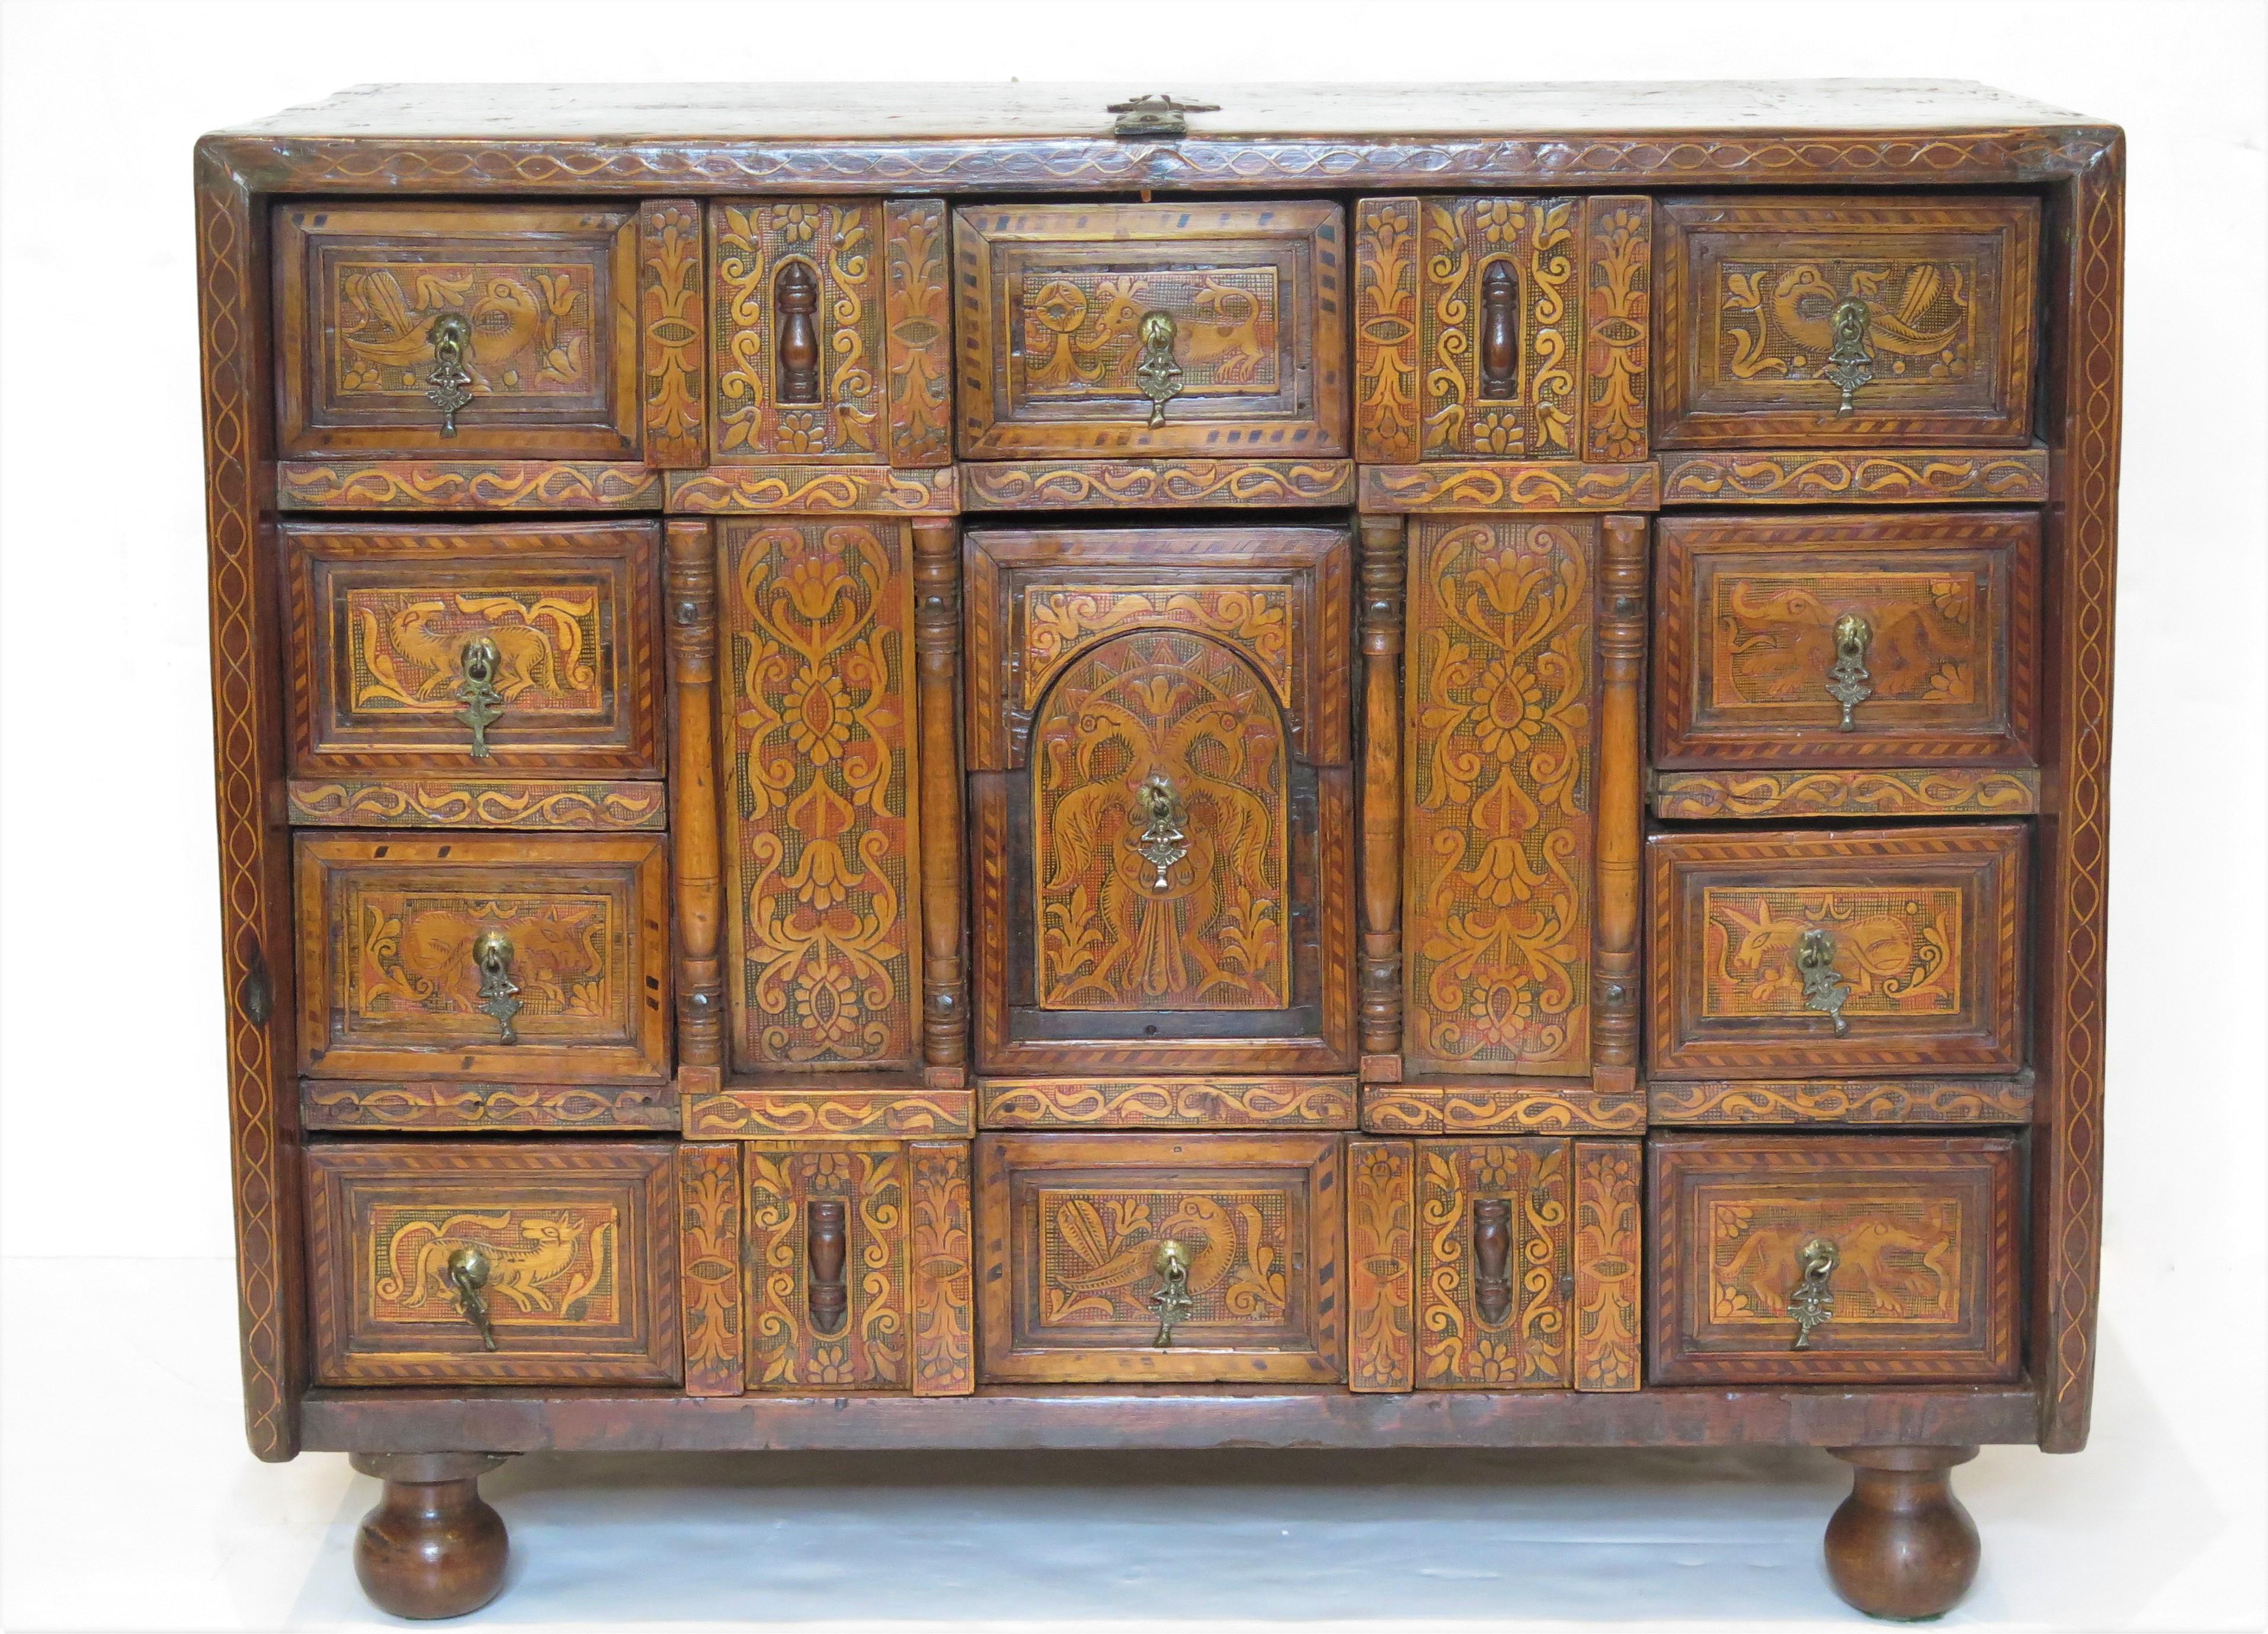 a 17th century Spanish vargueño / traveling cabinet with intricately inlaid top, sides, and small drawers, fruitwood, Italy, 17th century